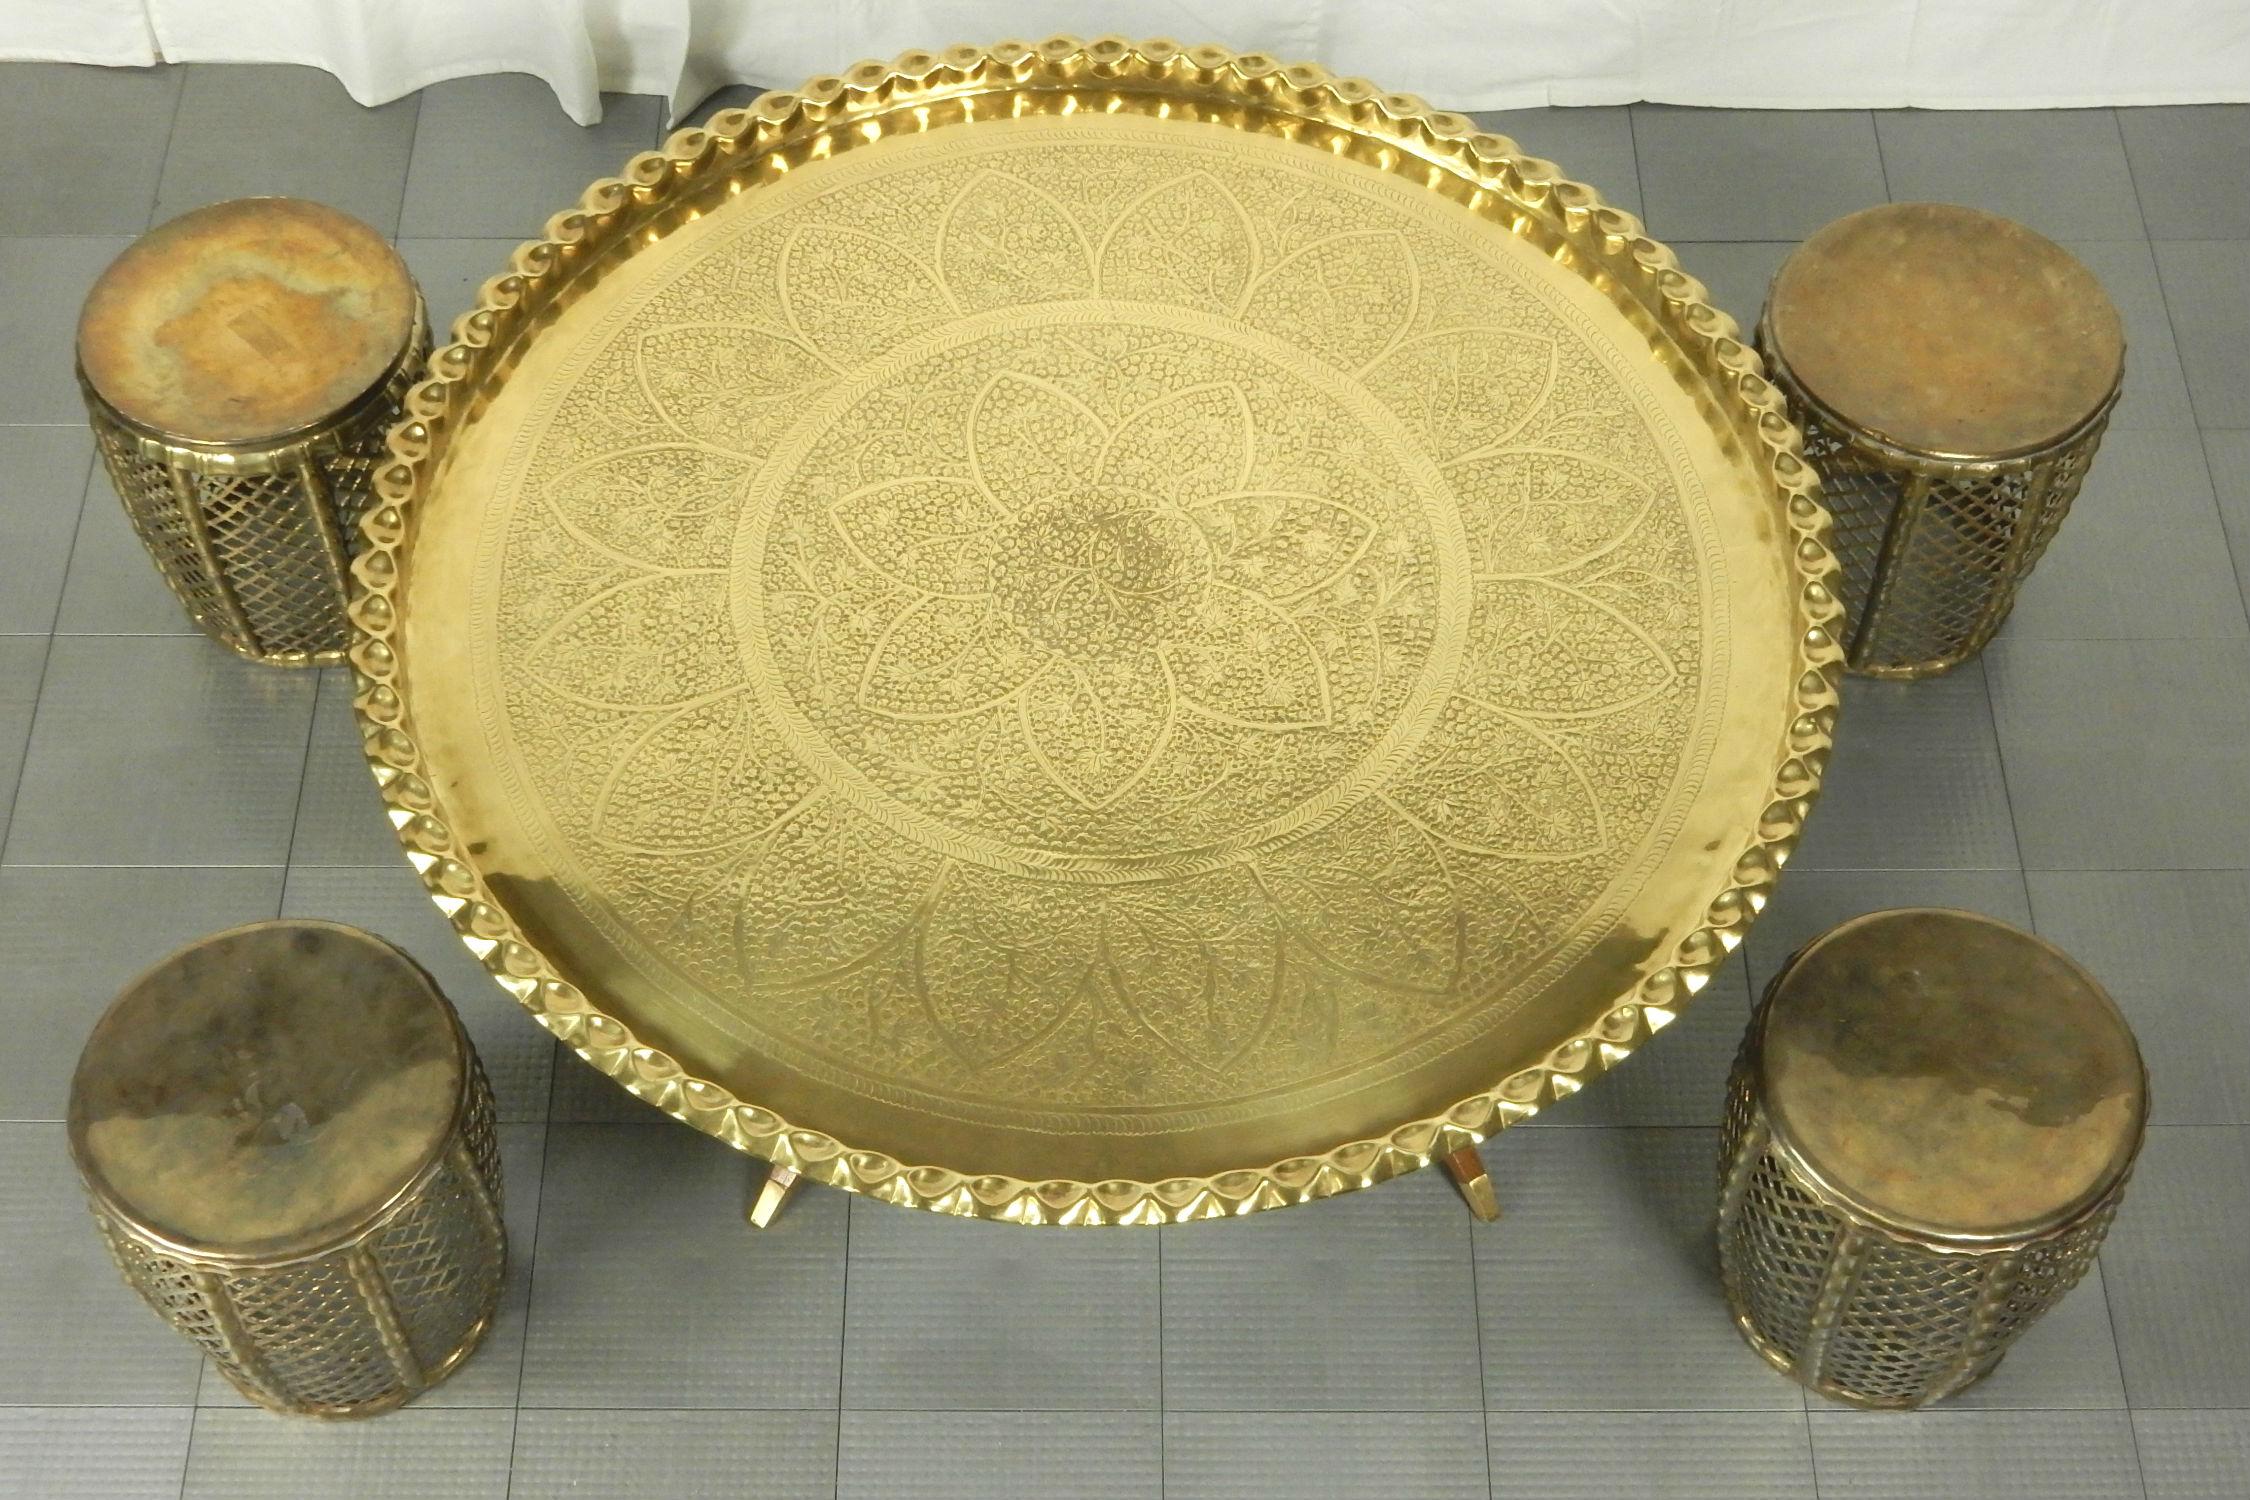 Mid-20th century large tooled brass tray on spider base coffee table with 4 stools. Clean, better than average condition.
Perfect arrangement for an eclectic home decor. 
Measures: 44 inch round tray X 16-1/2 inch tall, each stool 12 inch X 12 inch.